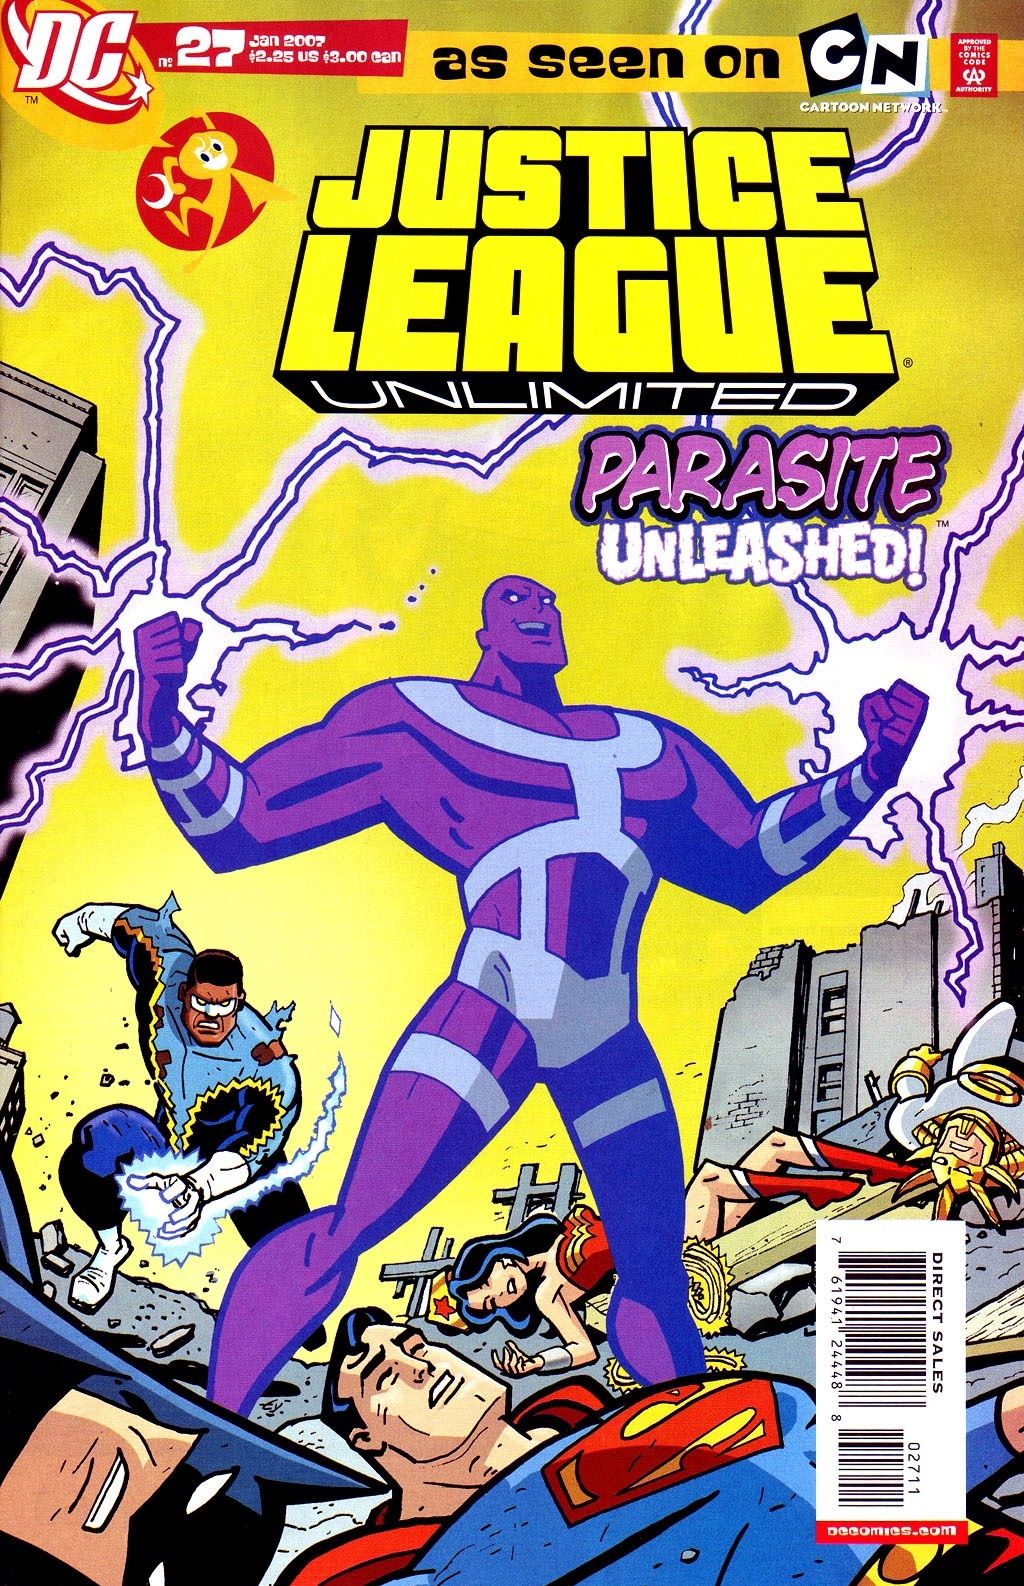 Black Lightning in the Justice League Unlimited comic book